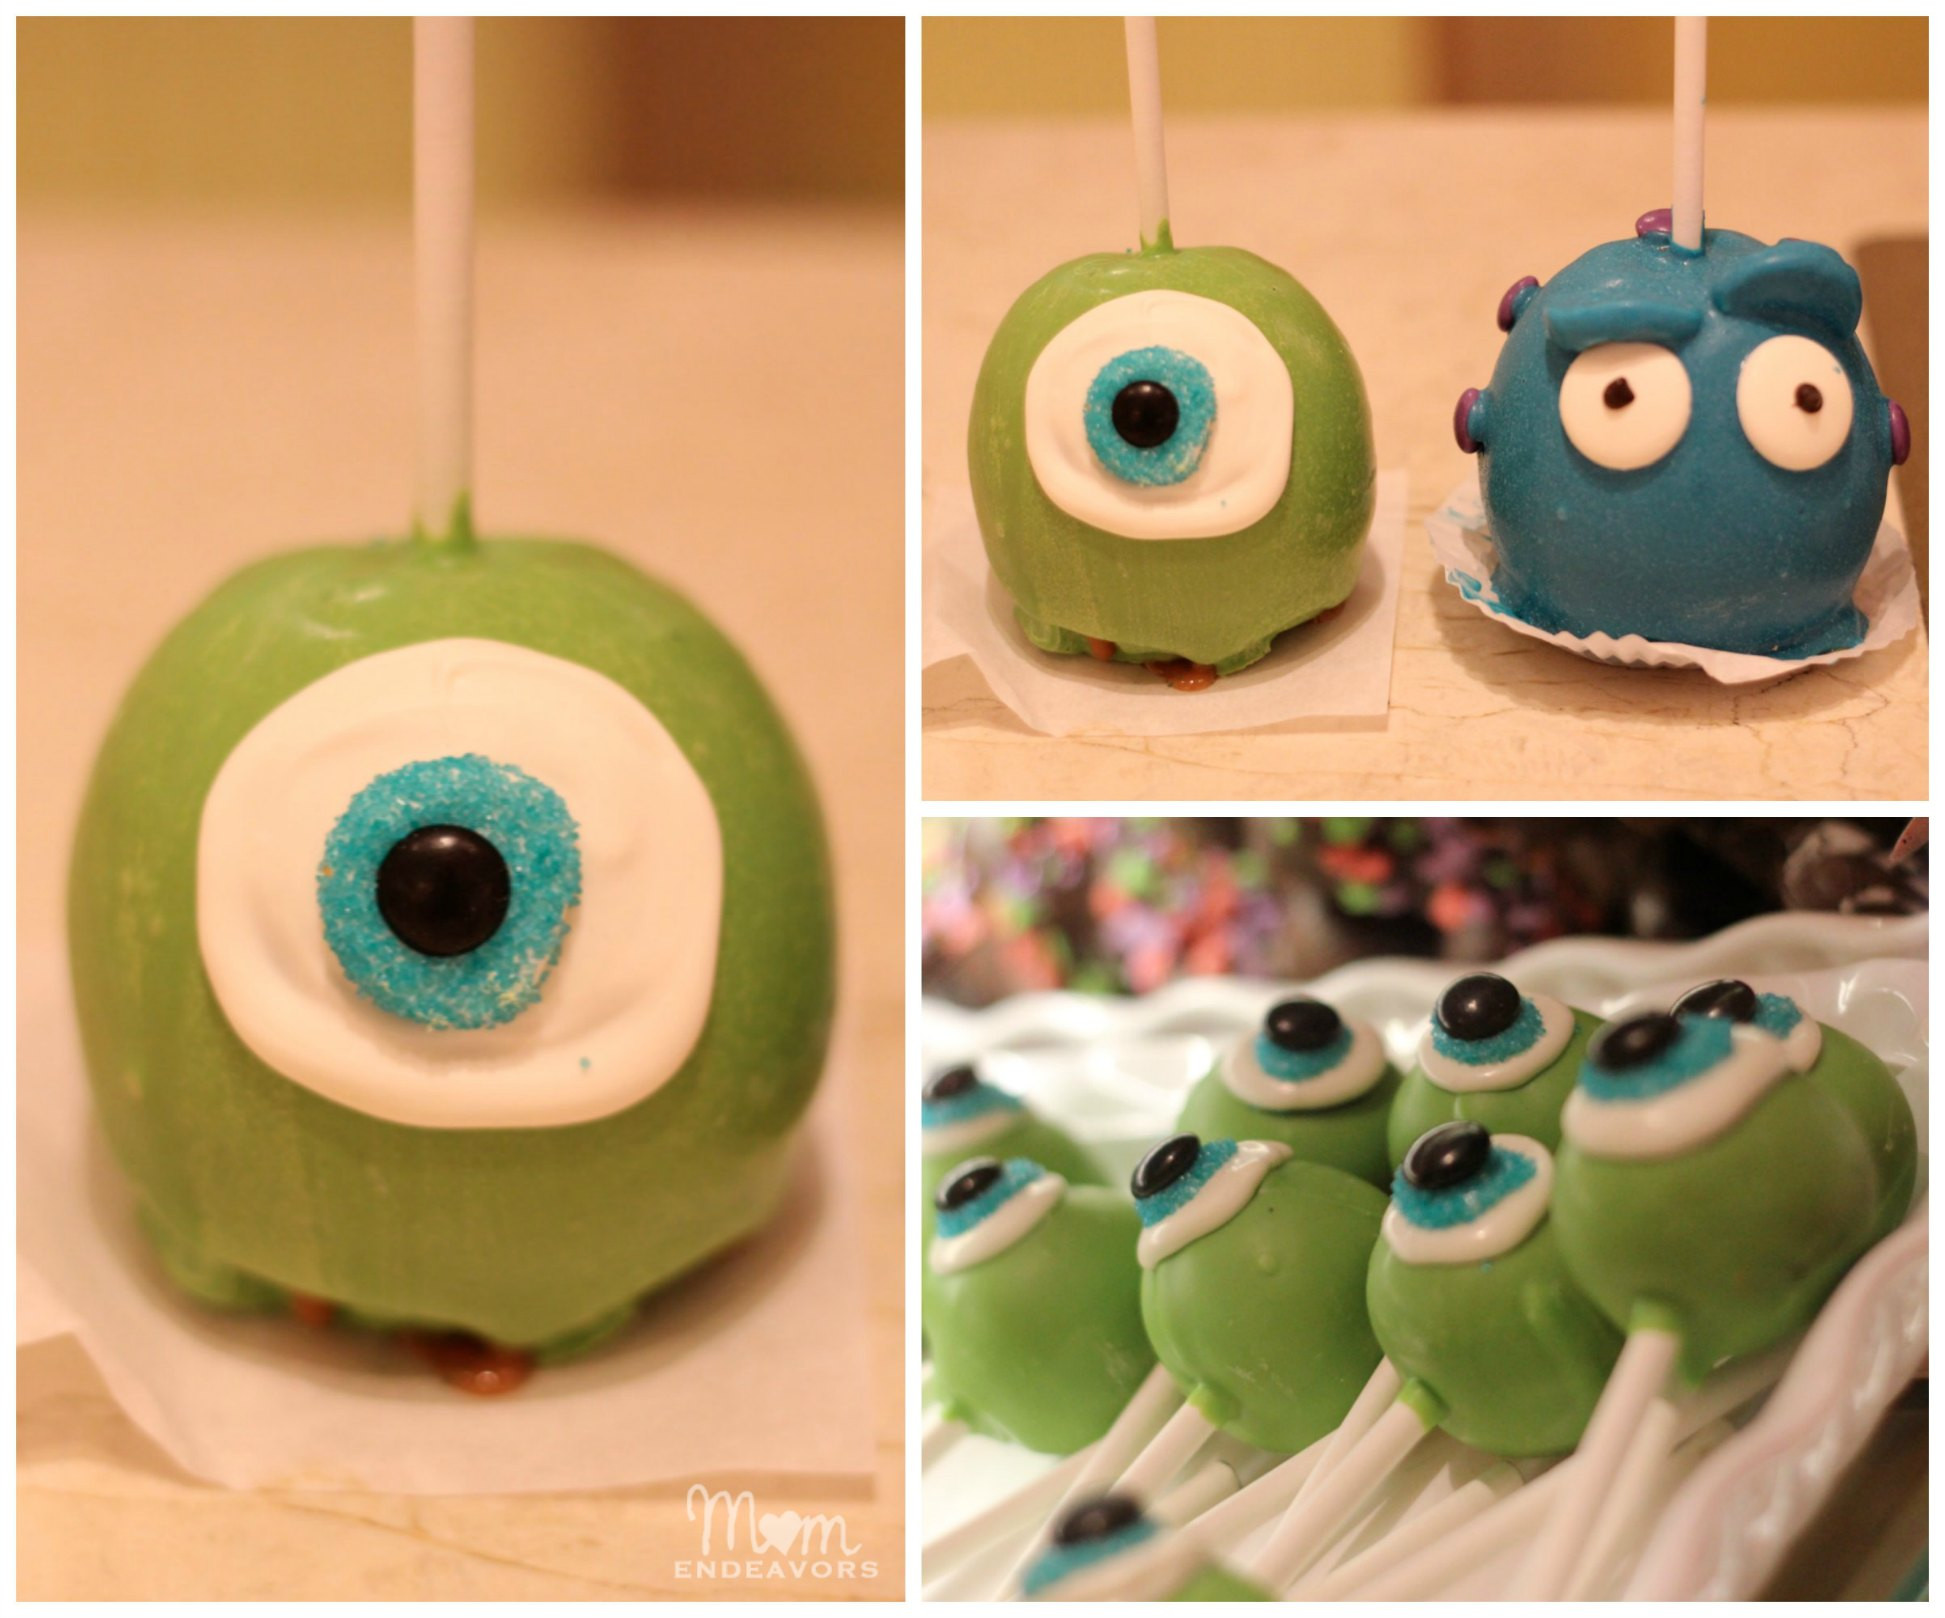 Monsters Inc Birthday Party Food Ideas
 25 Monstrously Creative Monsters University Crafts & Fun